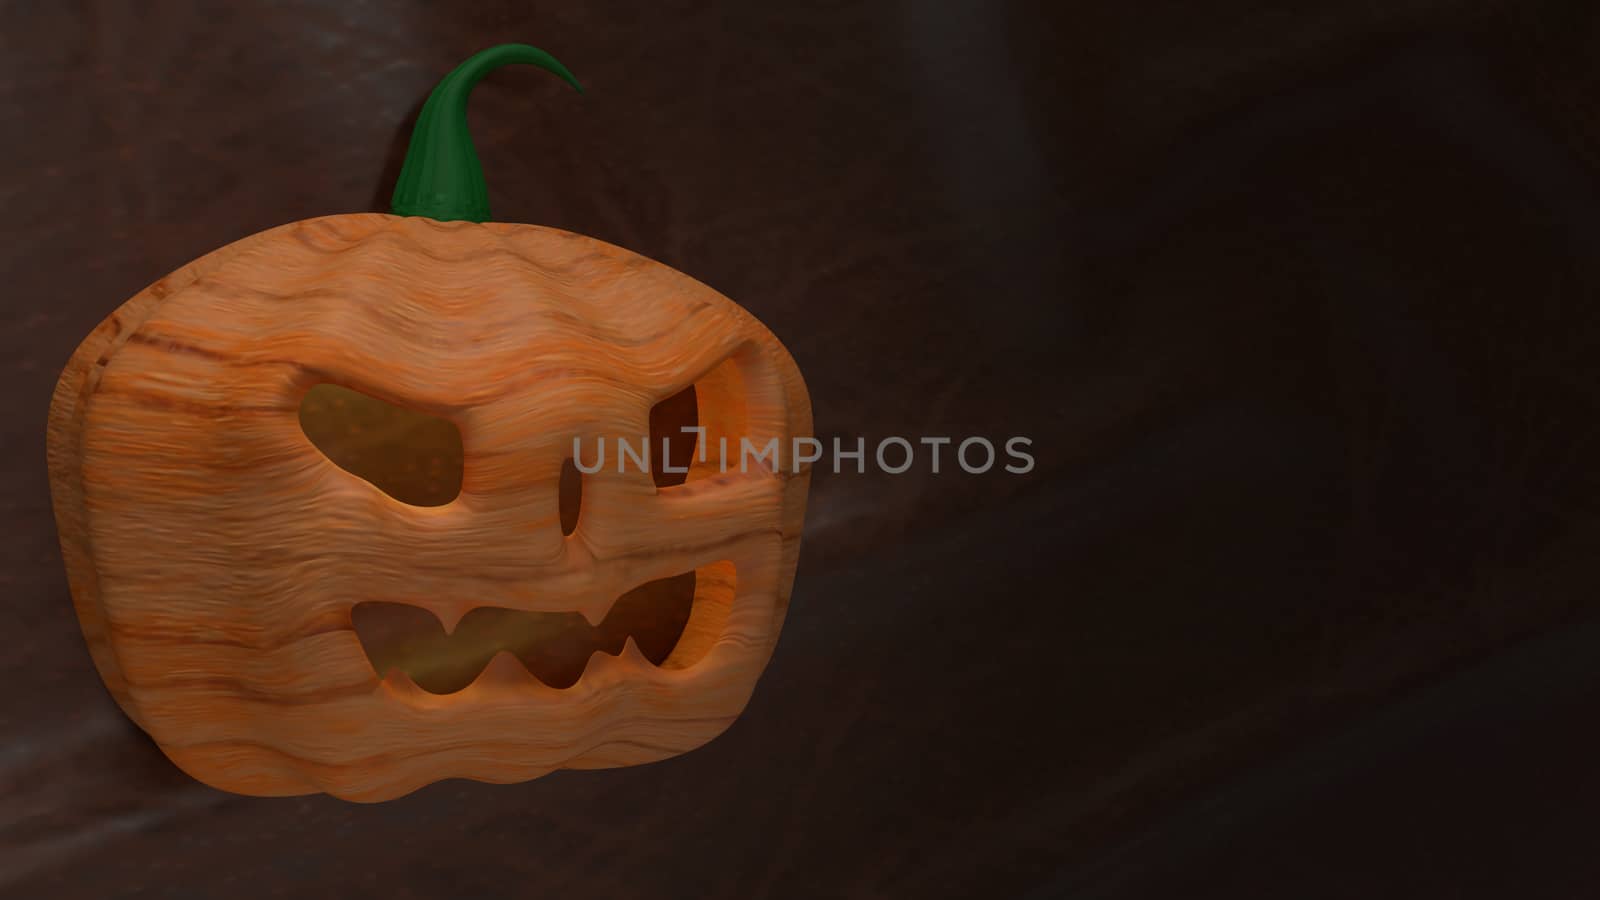  jack o lantern  on cow leather  background for halloween content 3d rendering.